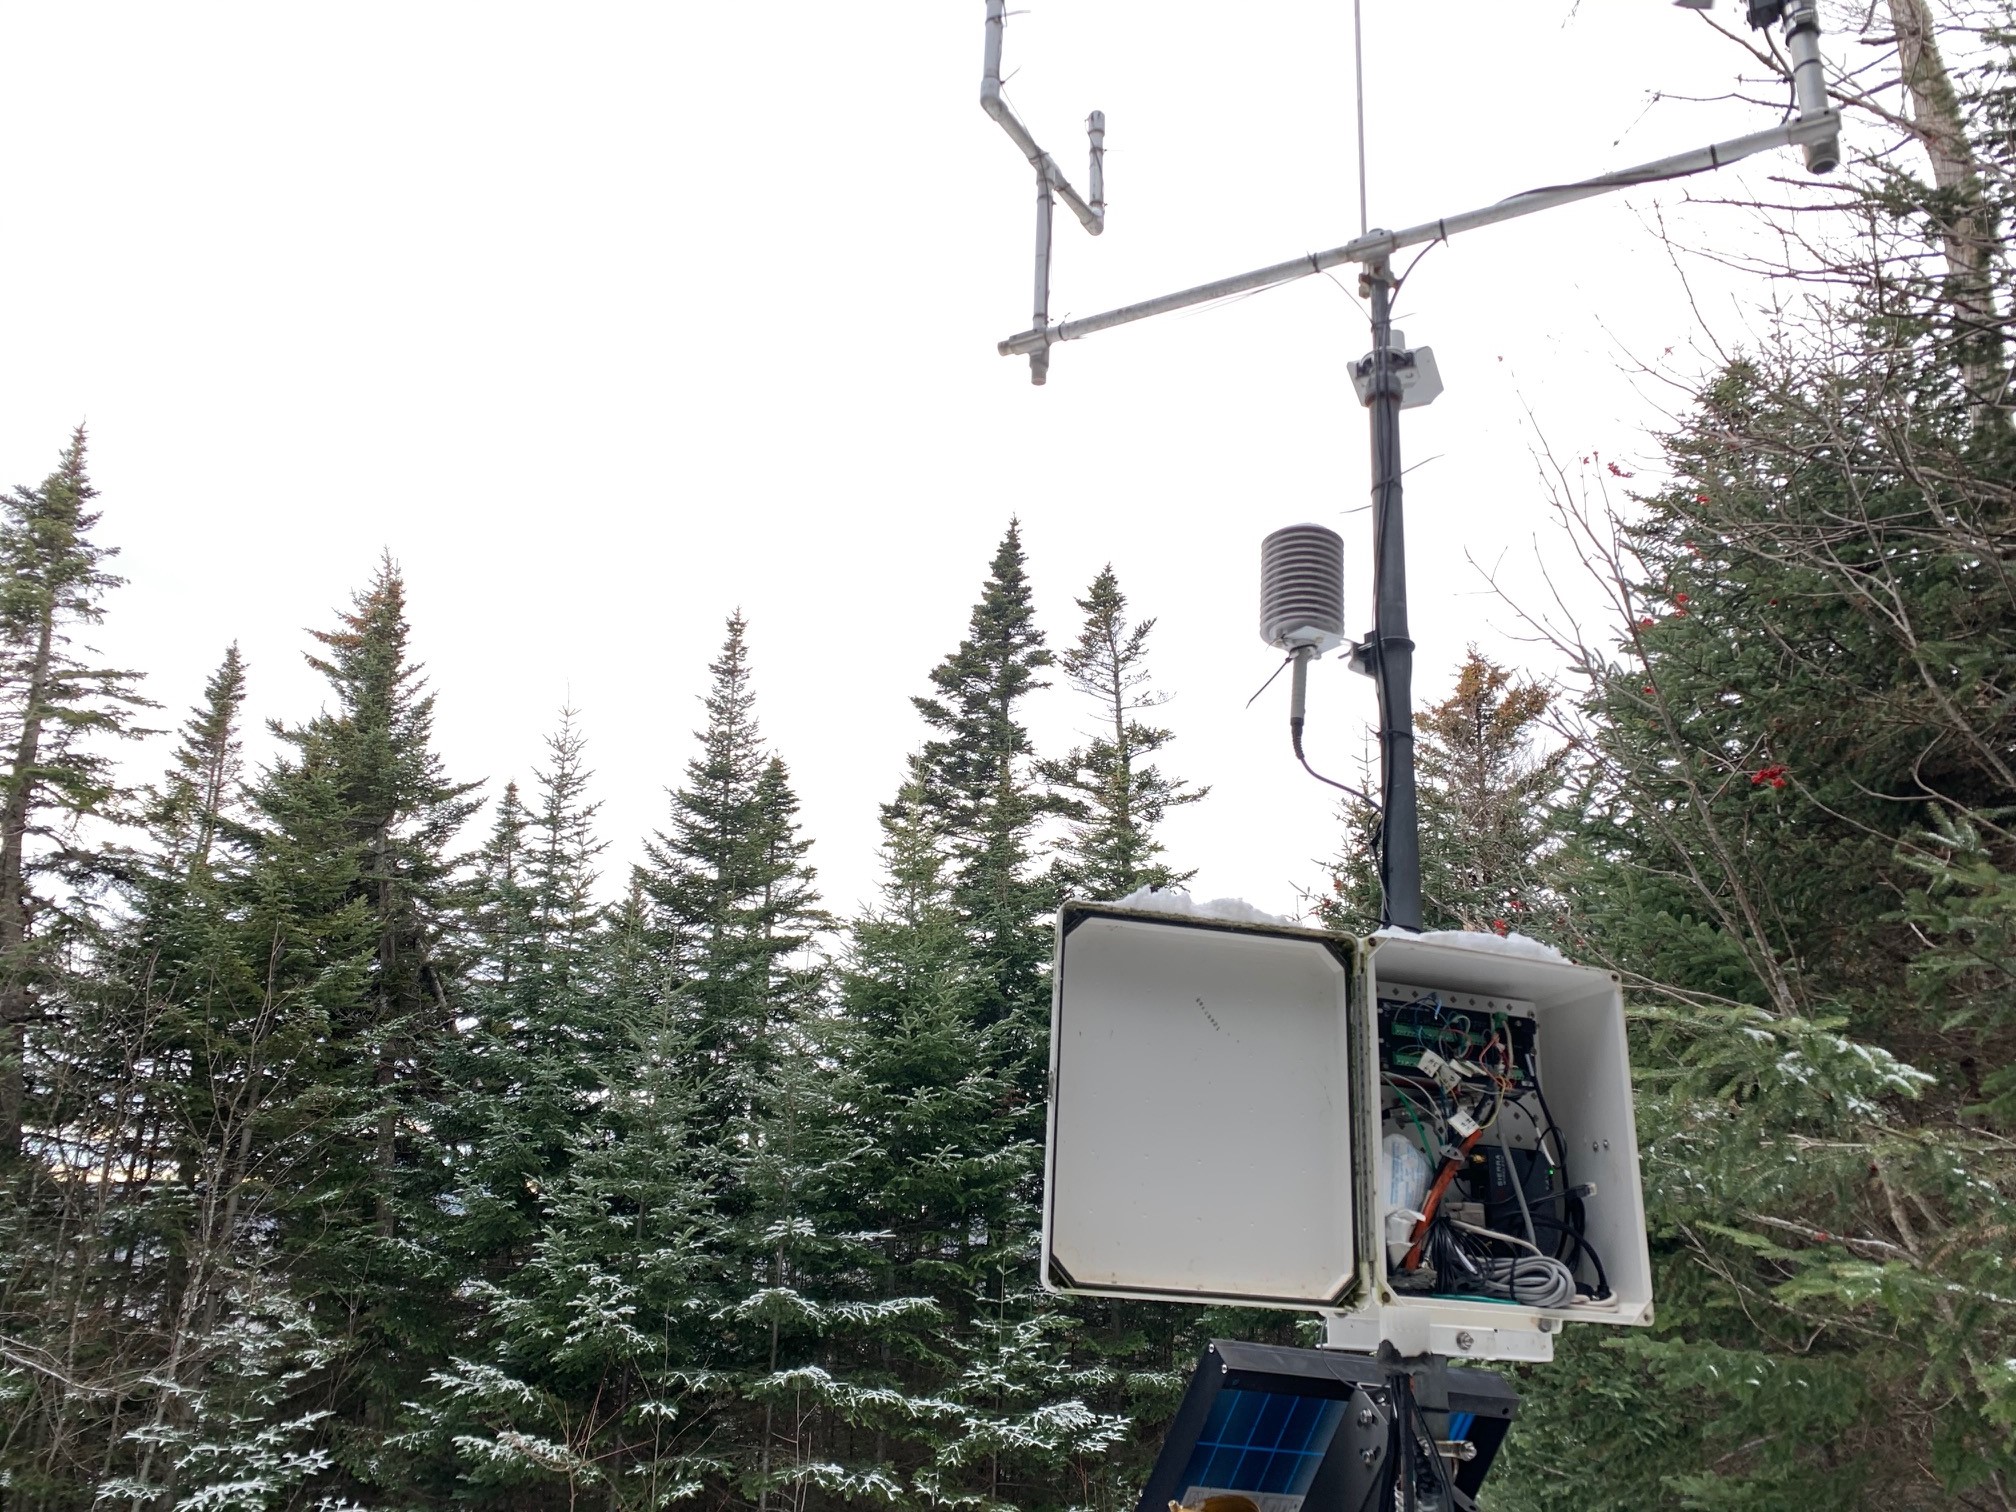 FEMC operated meteorological station on Mount Mansfield in Vermont.